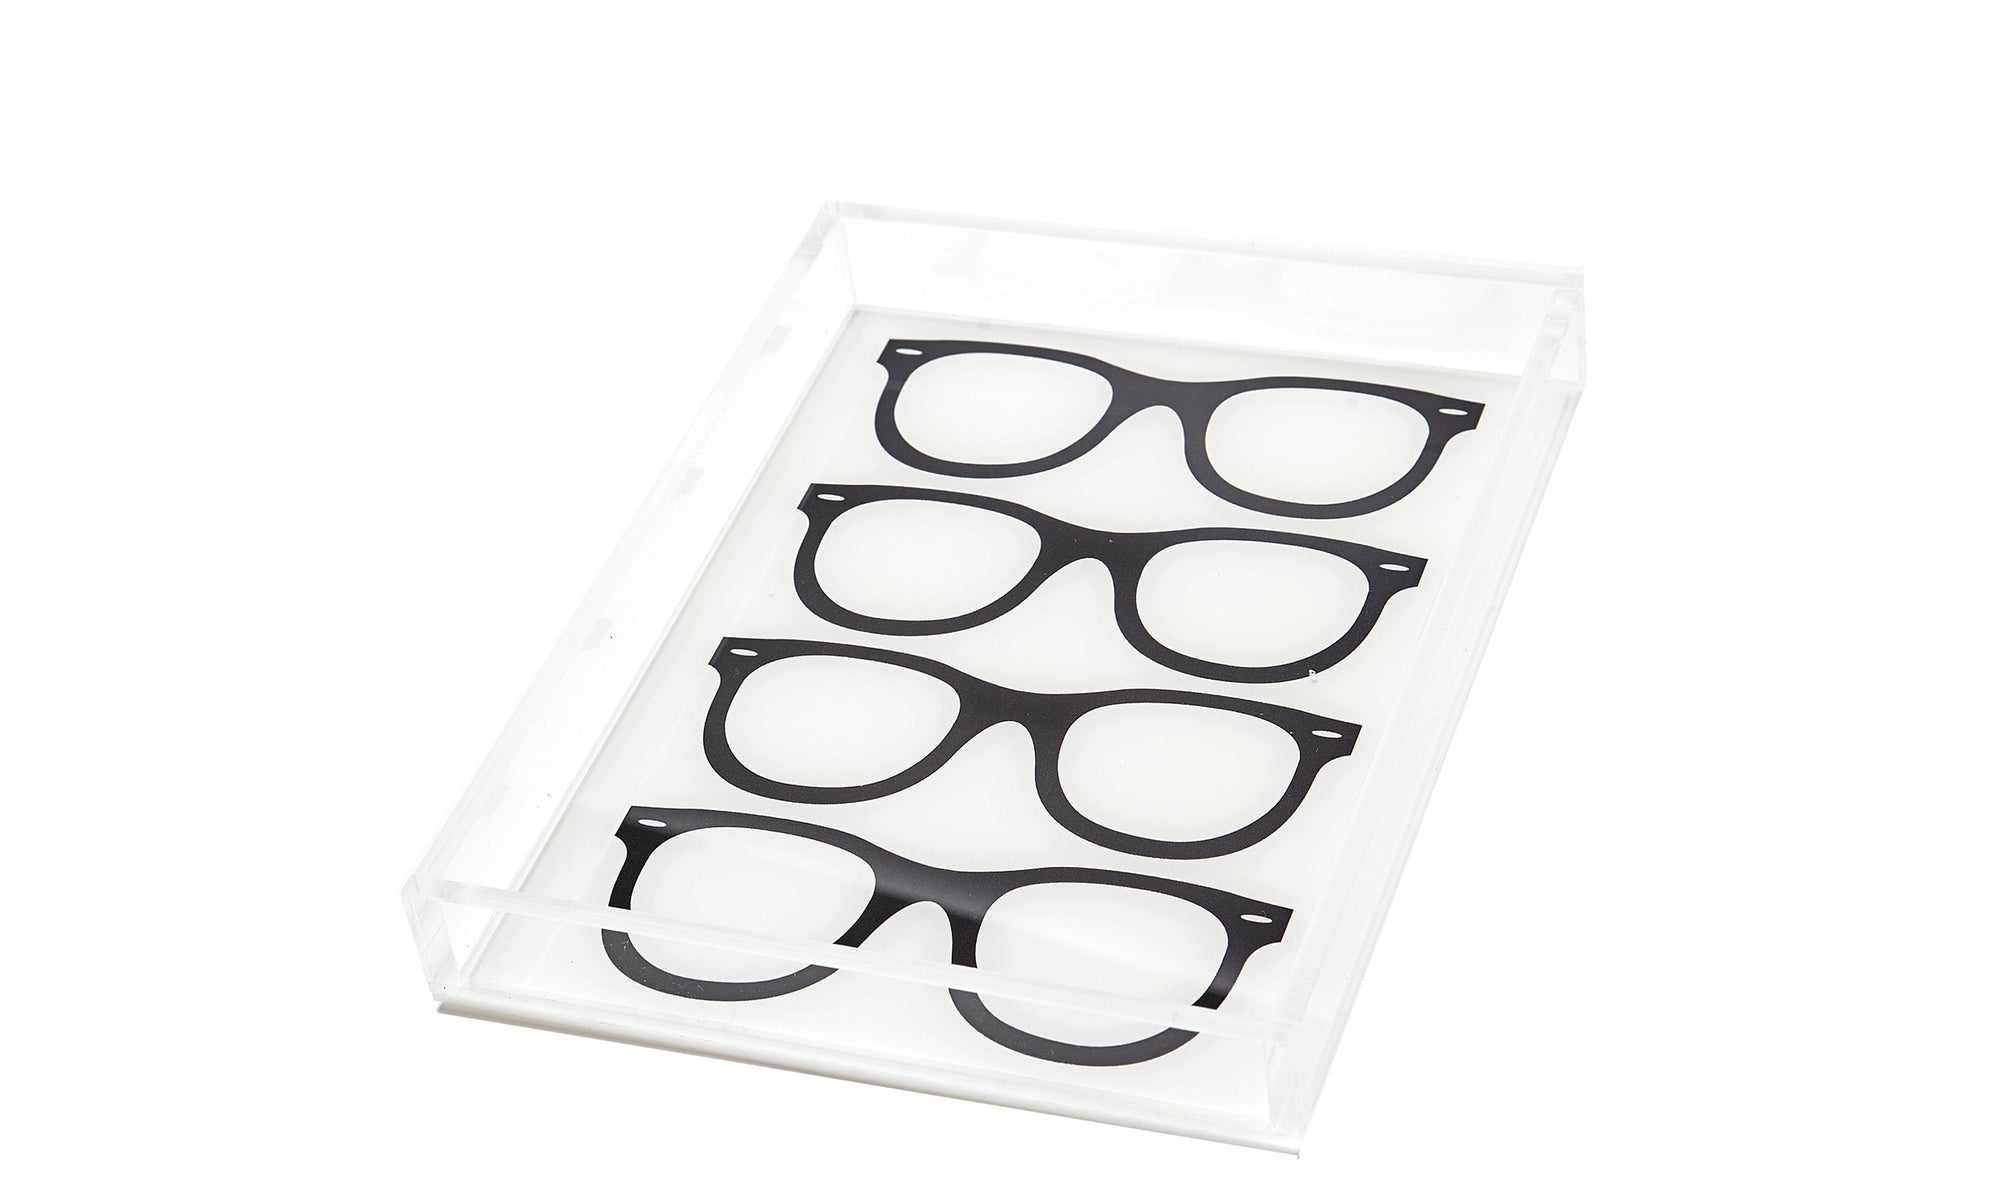 Tray GLASSES Black 6 inches by 8 inches 